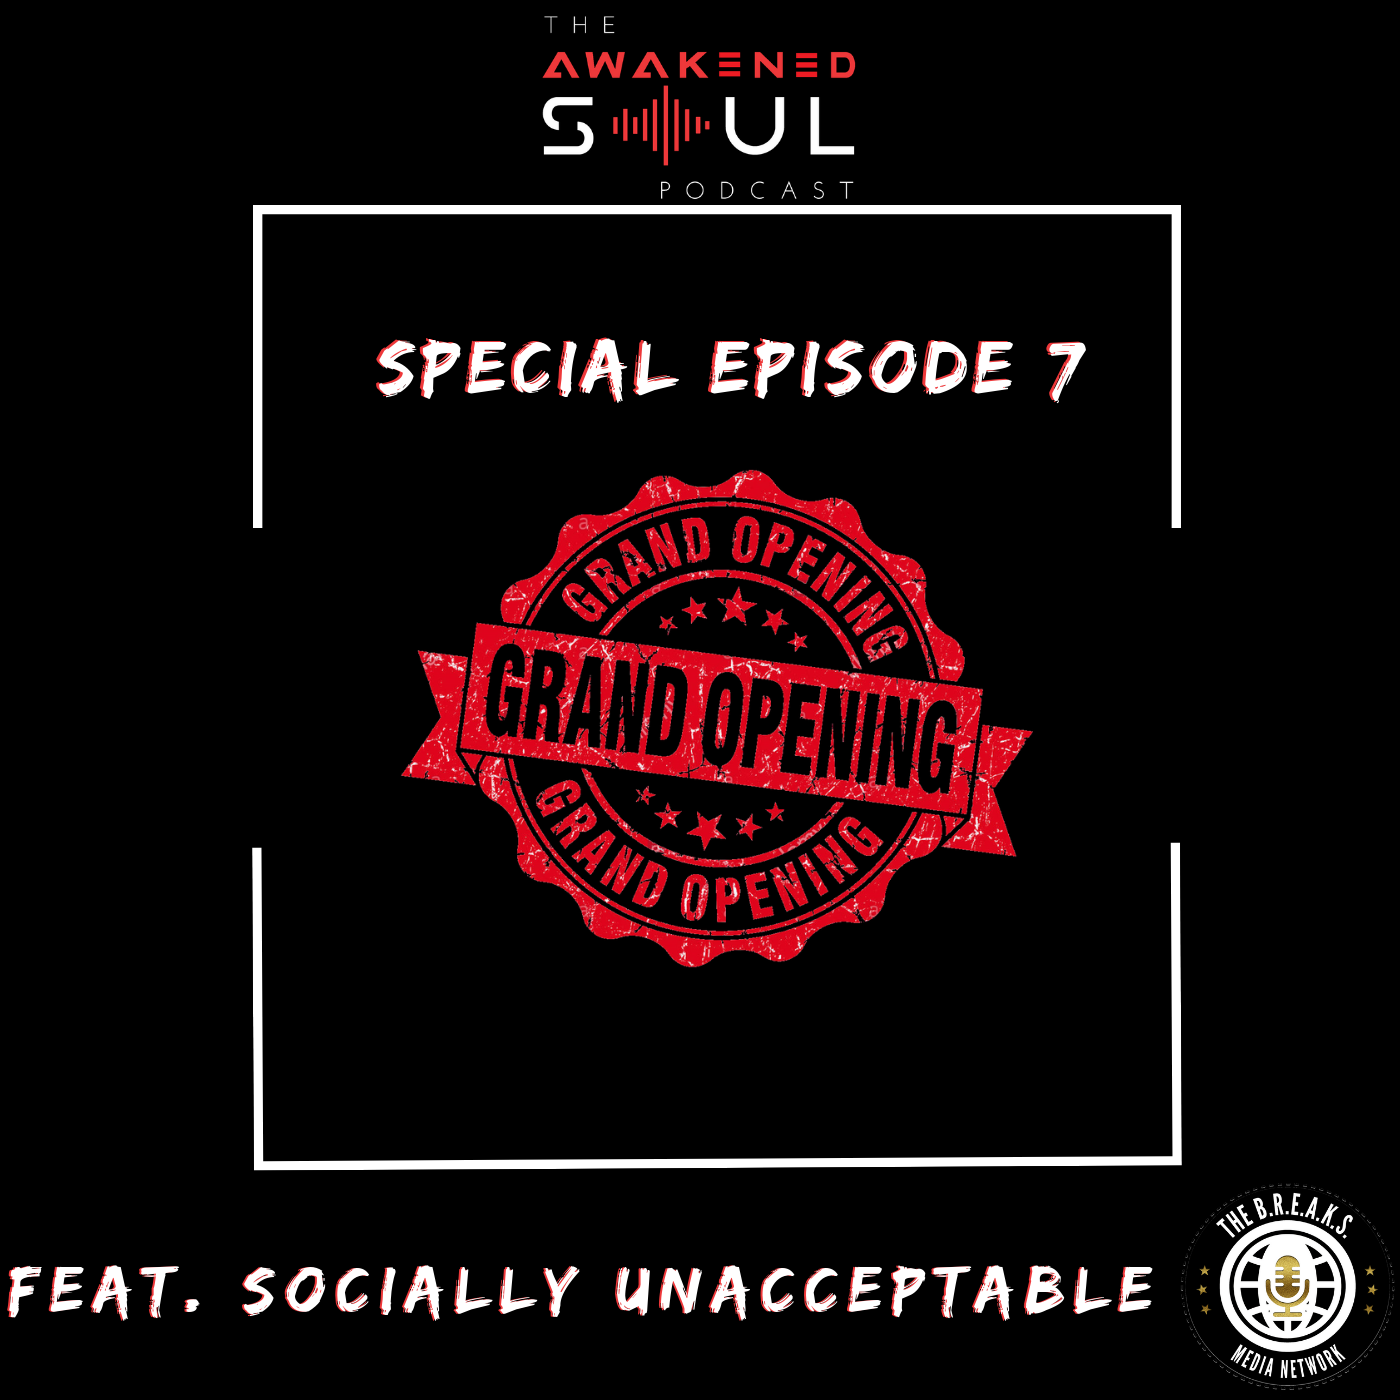 Special Episode 7: Grand Opening